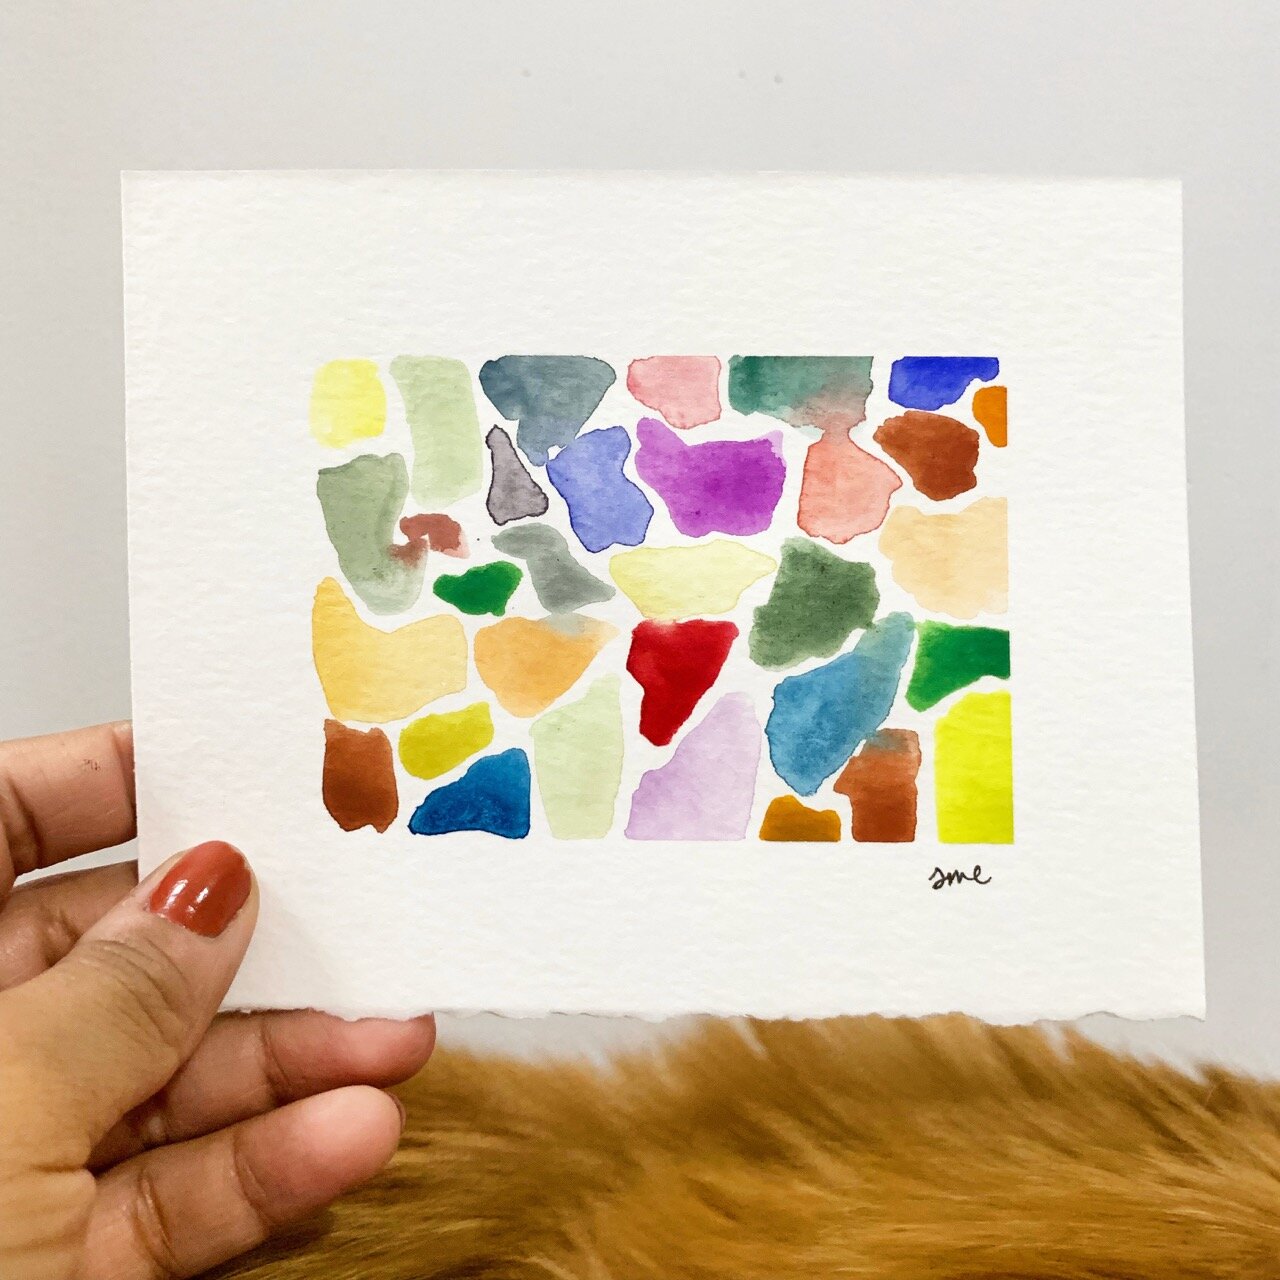 100 days abstract watercolor - 1 (1).jpg